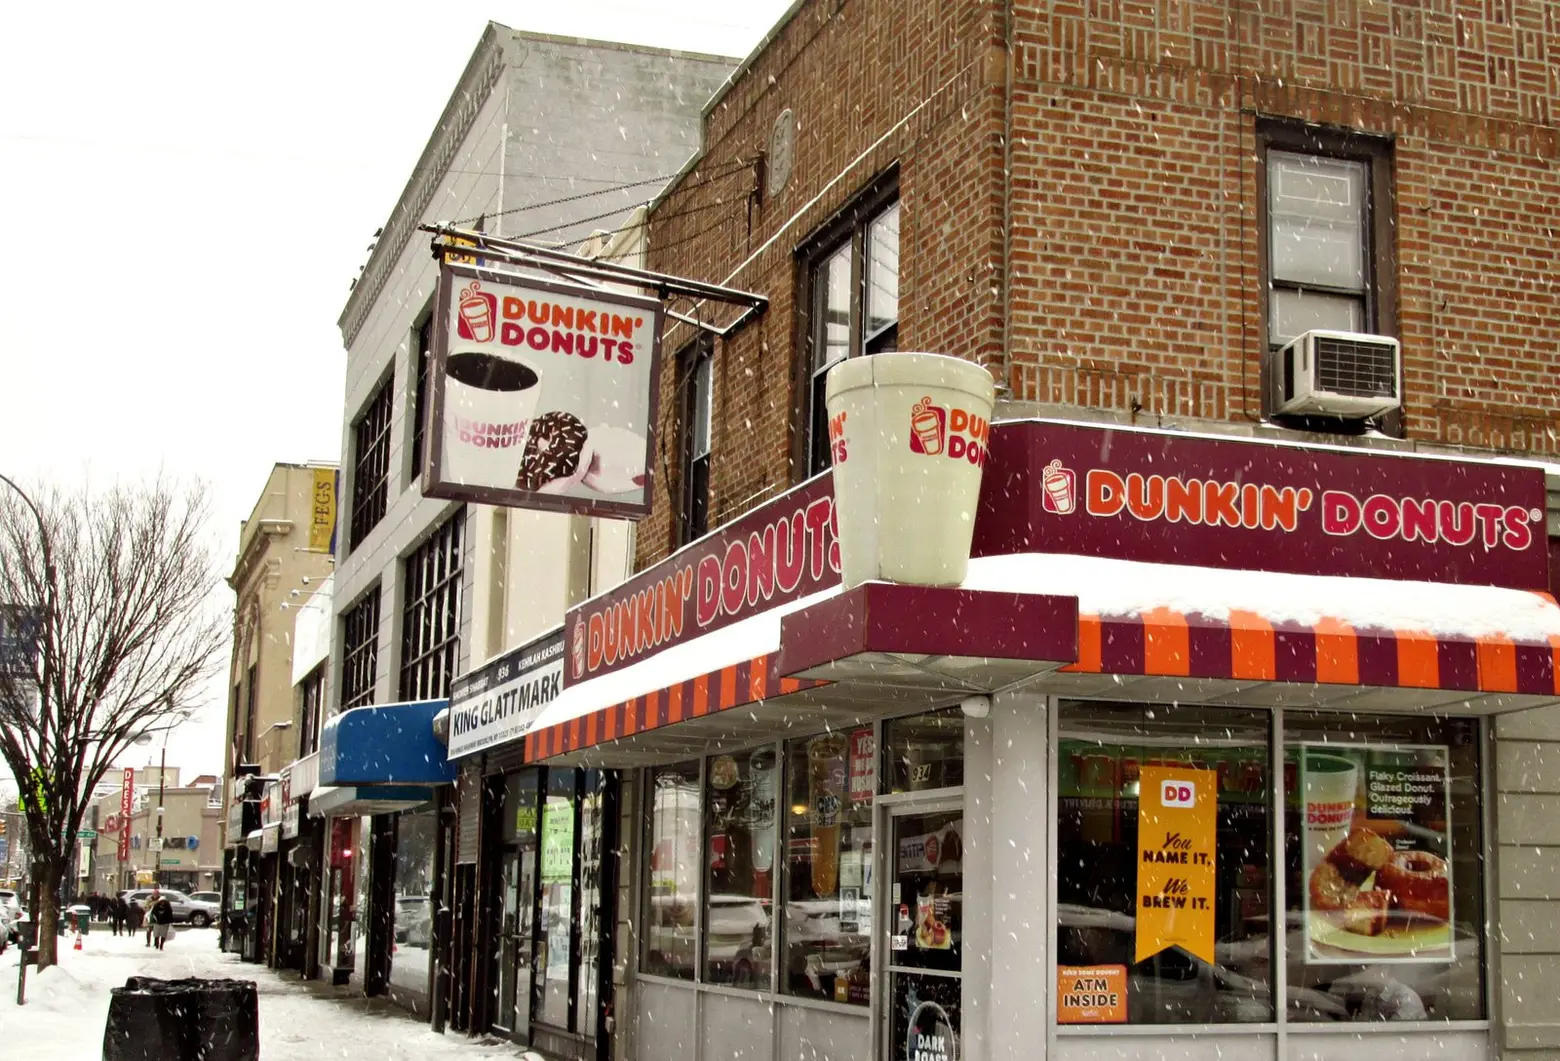 For the ninth consecutive year, Dunkin’ Donuts ranks as NYC’s largest national retailer